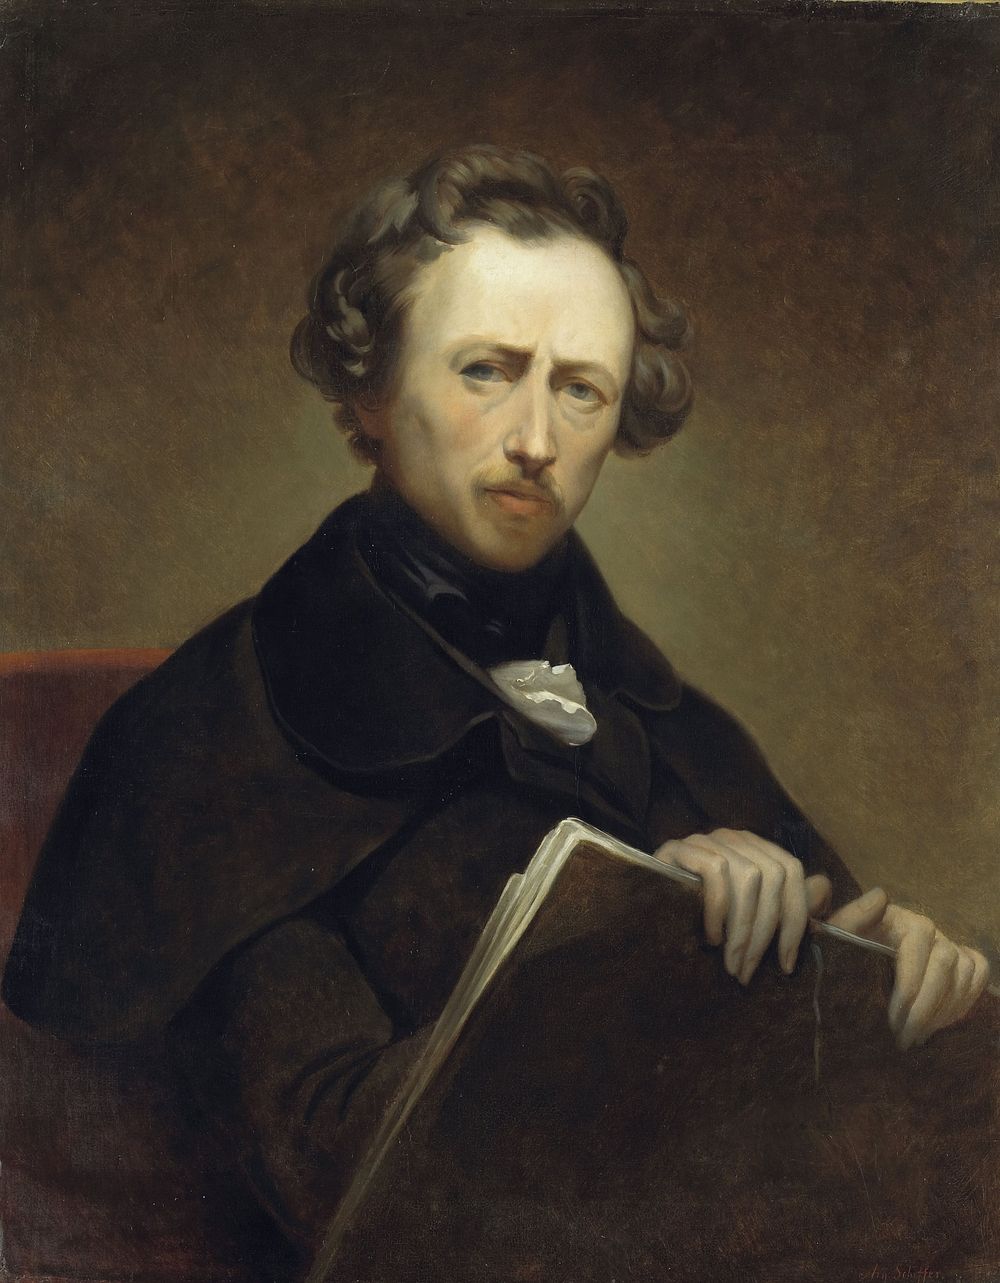 Self Portrait at the age of 43 (c. 1838) by Ary Scheffer